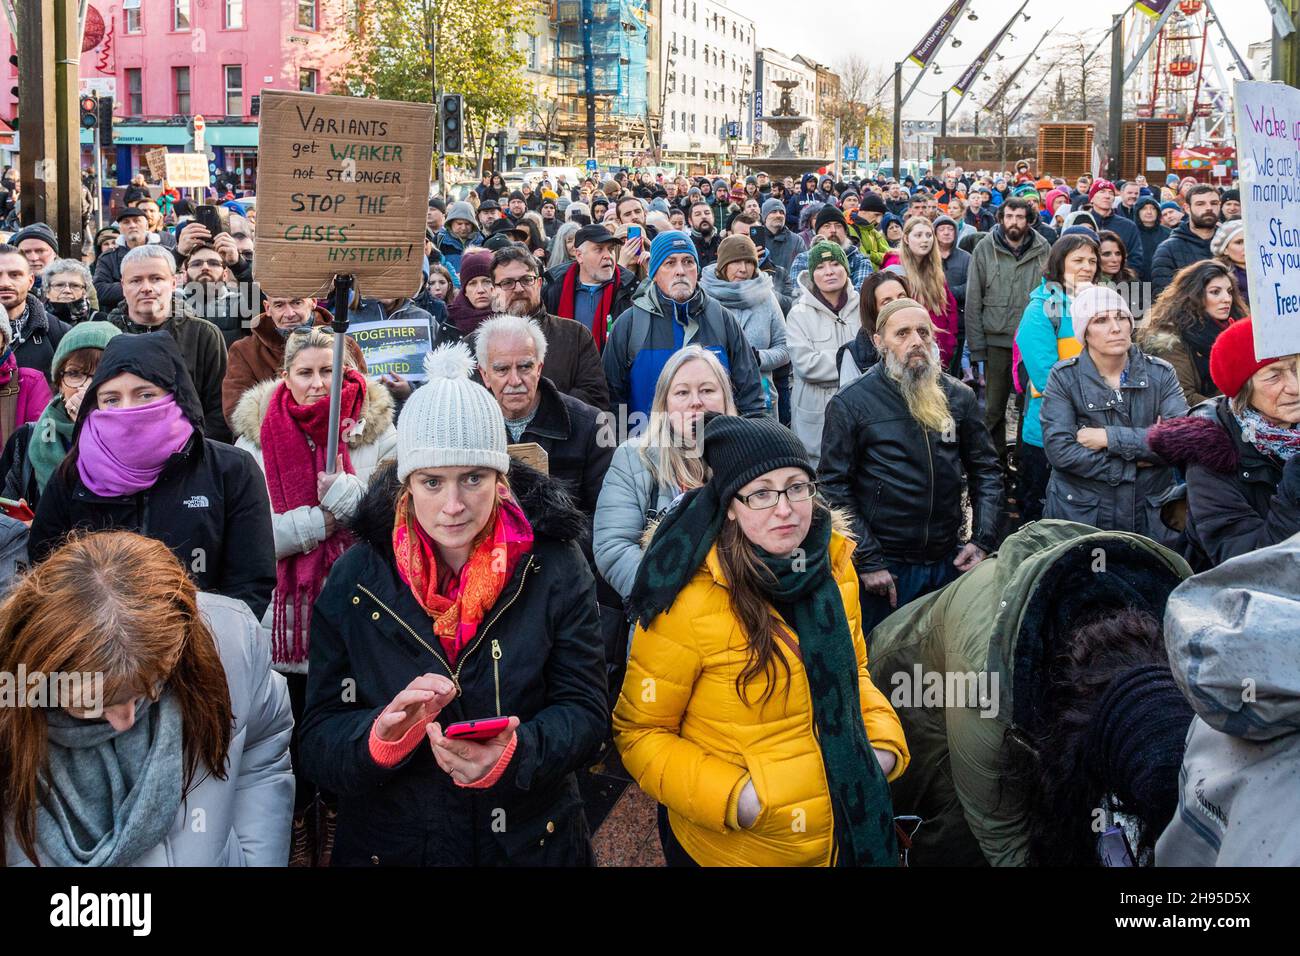 Cork, Ireland. 4th Dec, 2021. Around 500 people held a protest in Cork city today against lockdown; vaccinations for children; vaccine passports and face masks. It comes as the government has imposed restrictions on hospitality and household mixing until 9th January. Credit: AG News/Alamy Live News Stock Photo